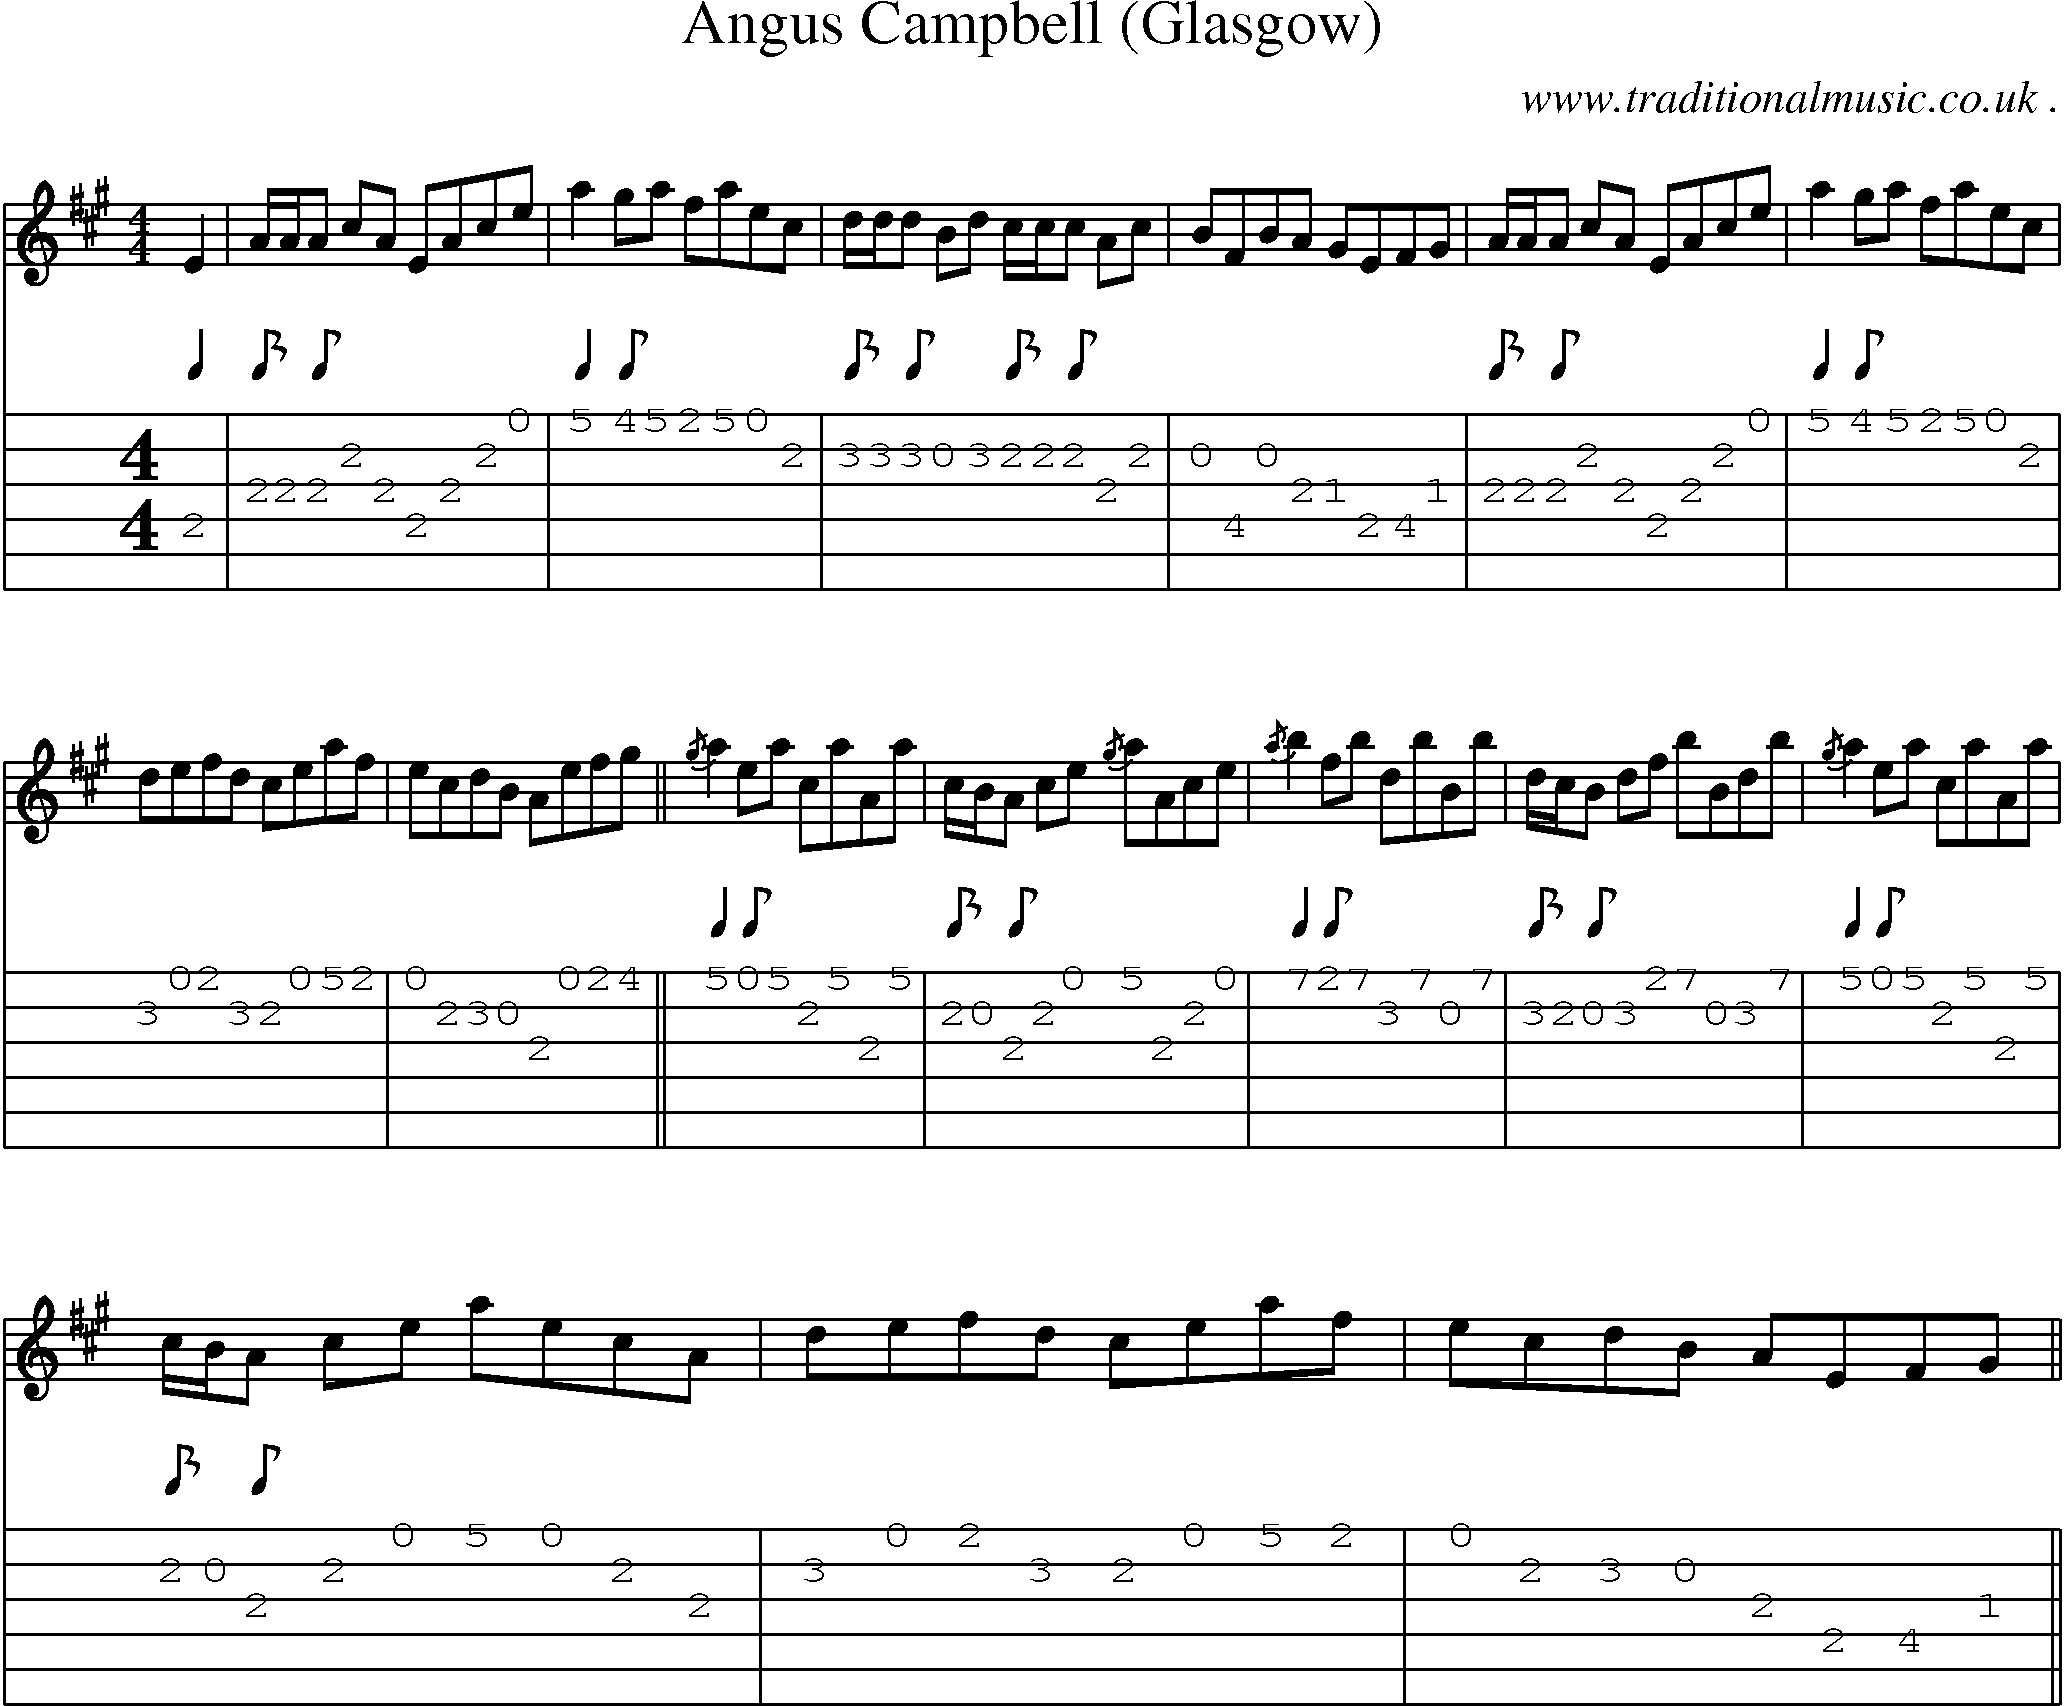 Sheet-music  score, Chords and Guitar Tabs for Angus Campbell Glasgow